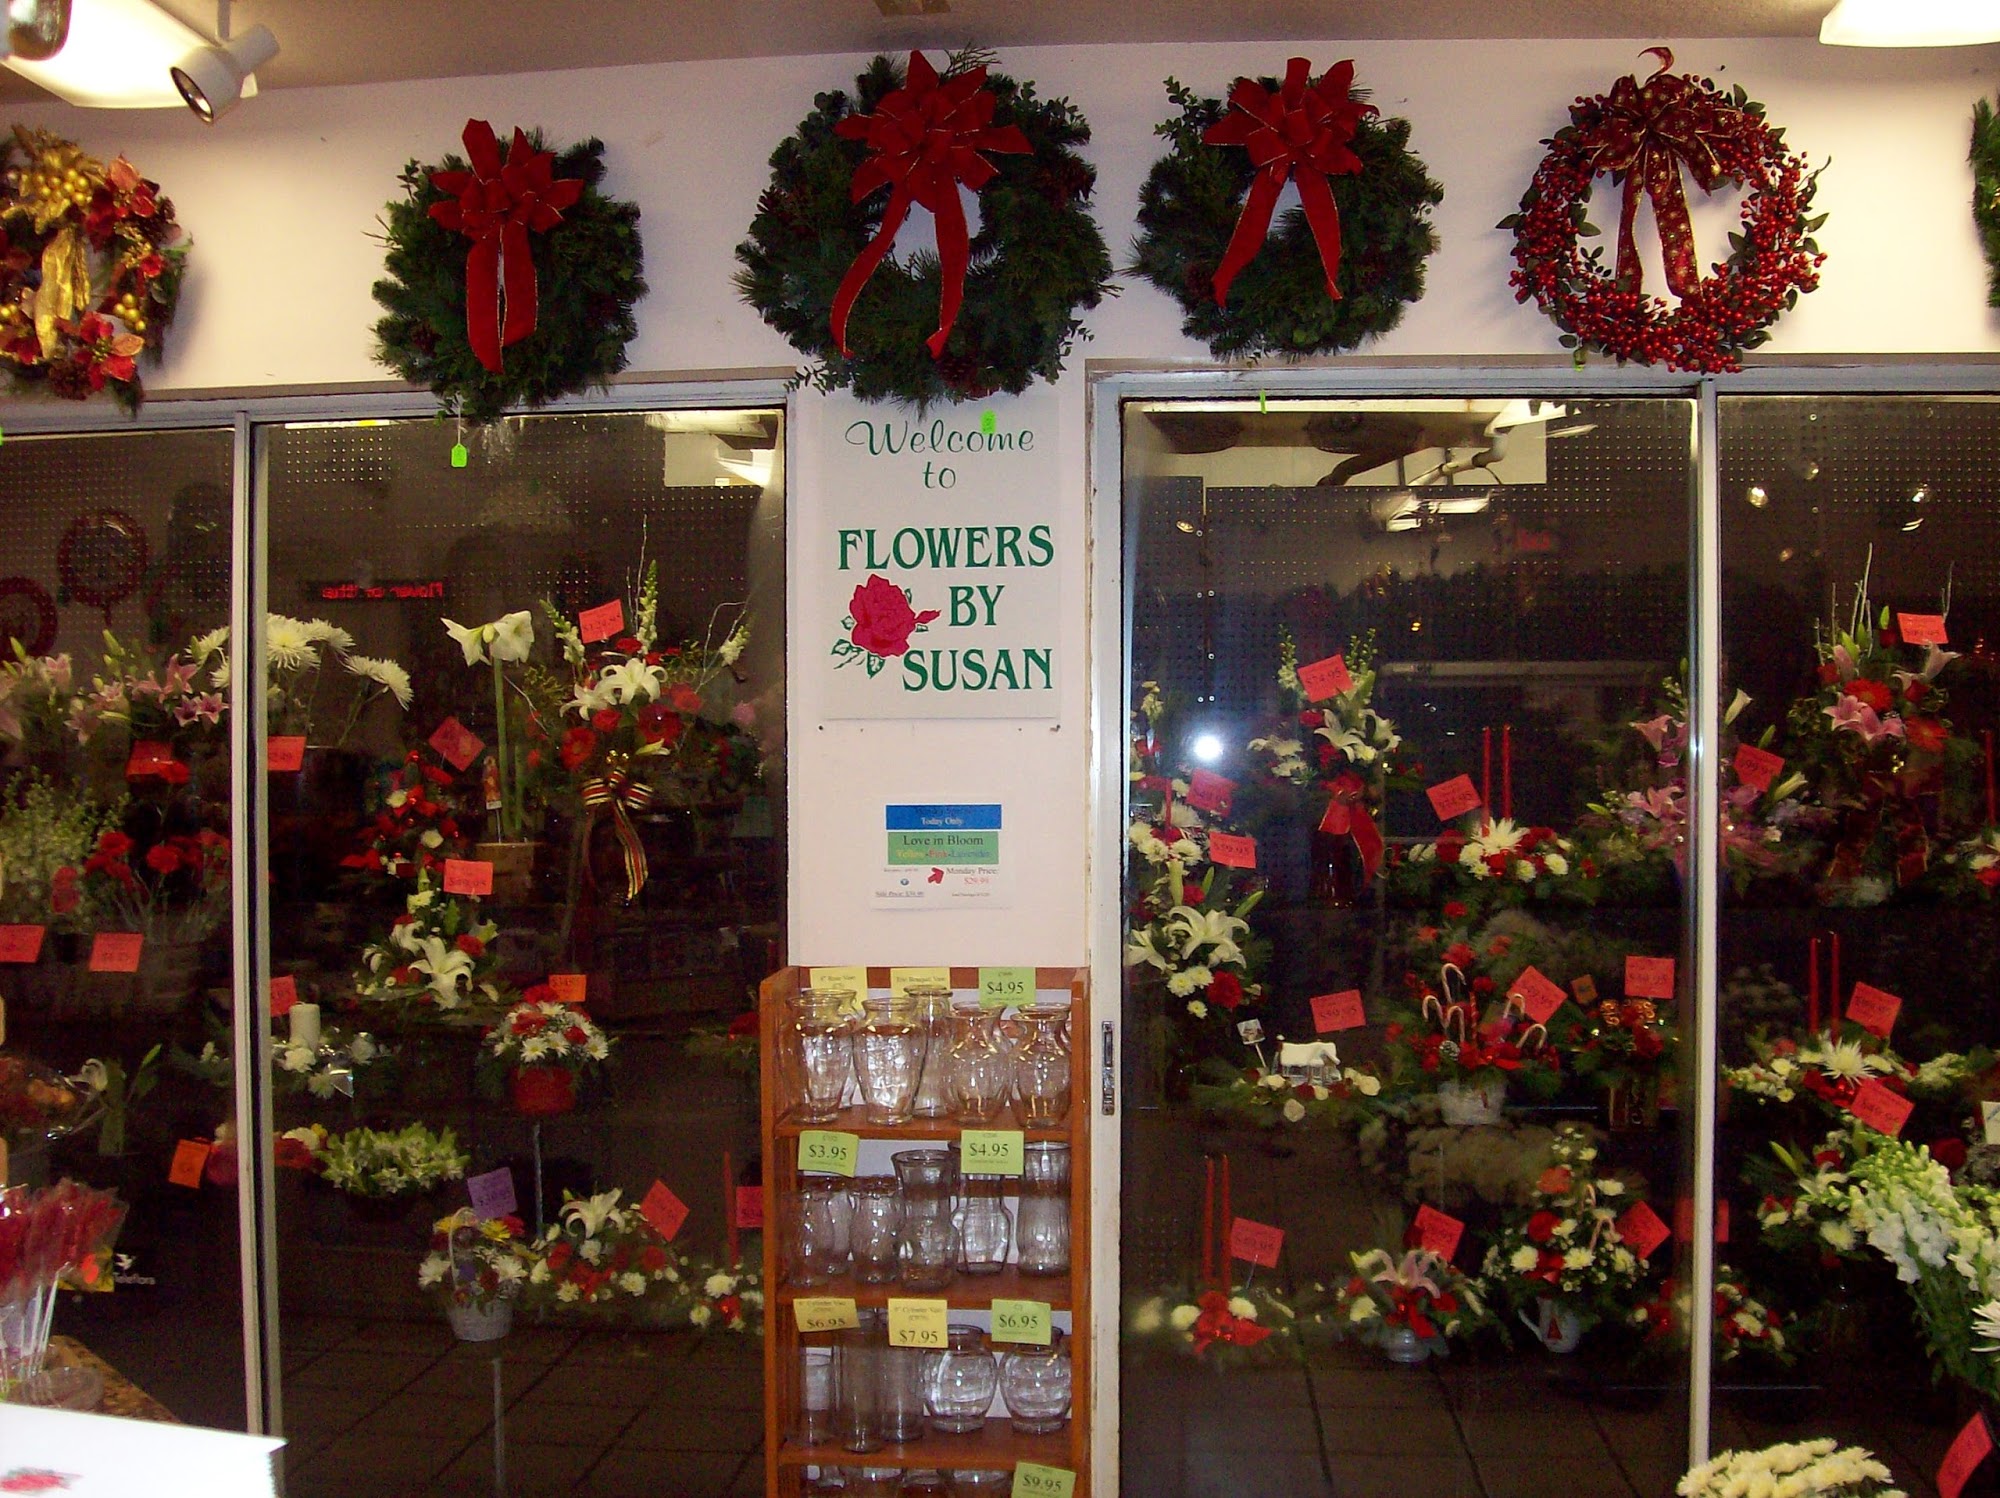 Flowers by Susan - Port St. Lucie Flower Delivery